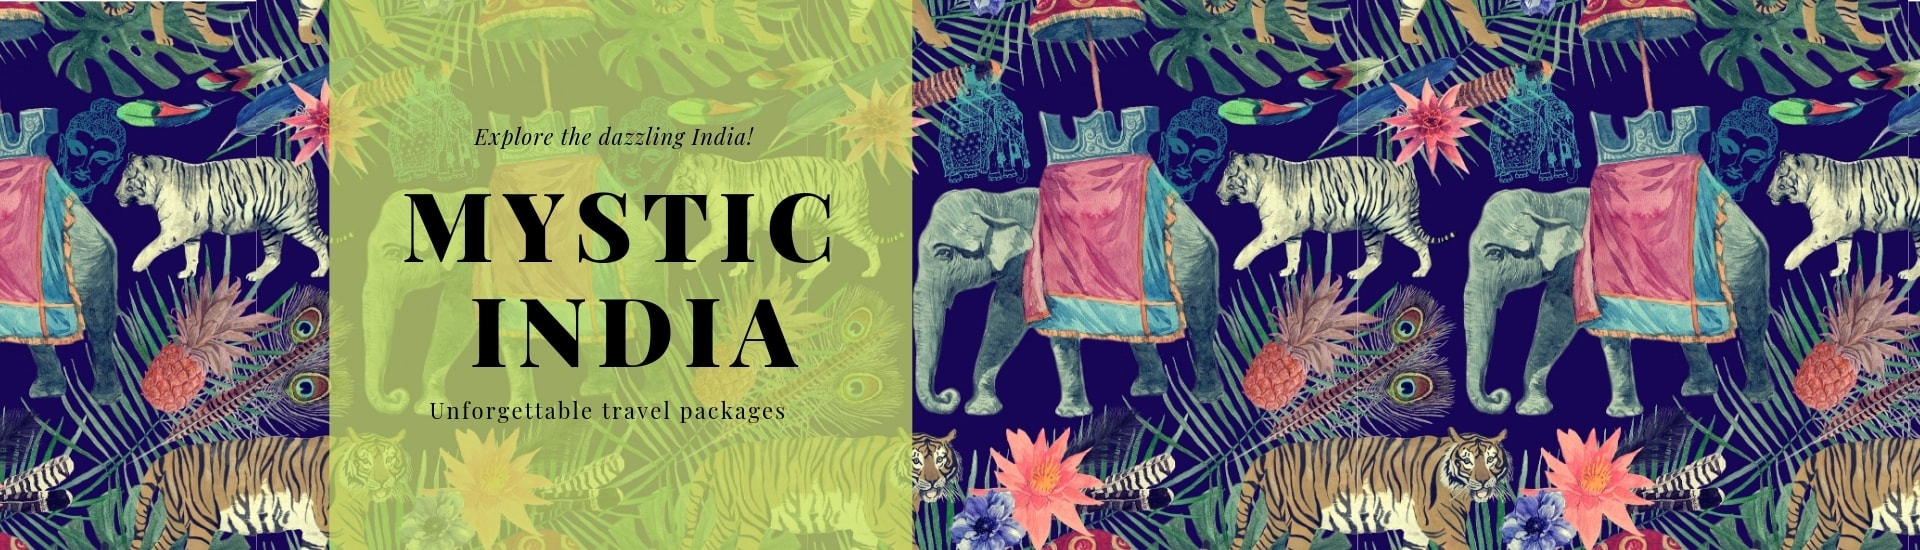 Mystic India Travel Packages